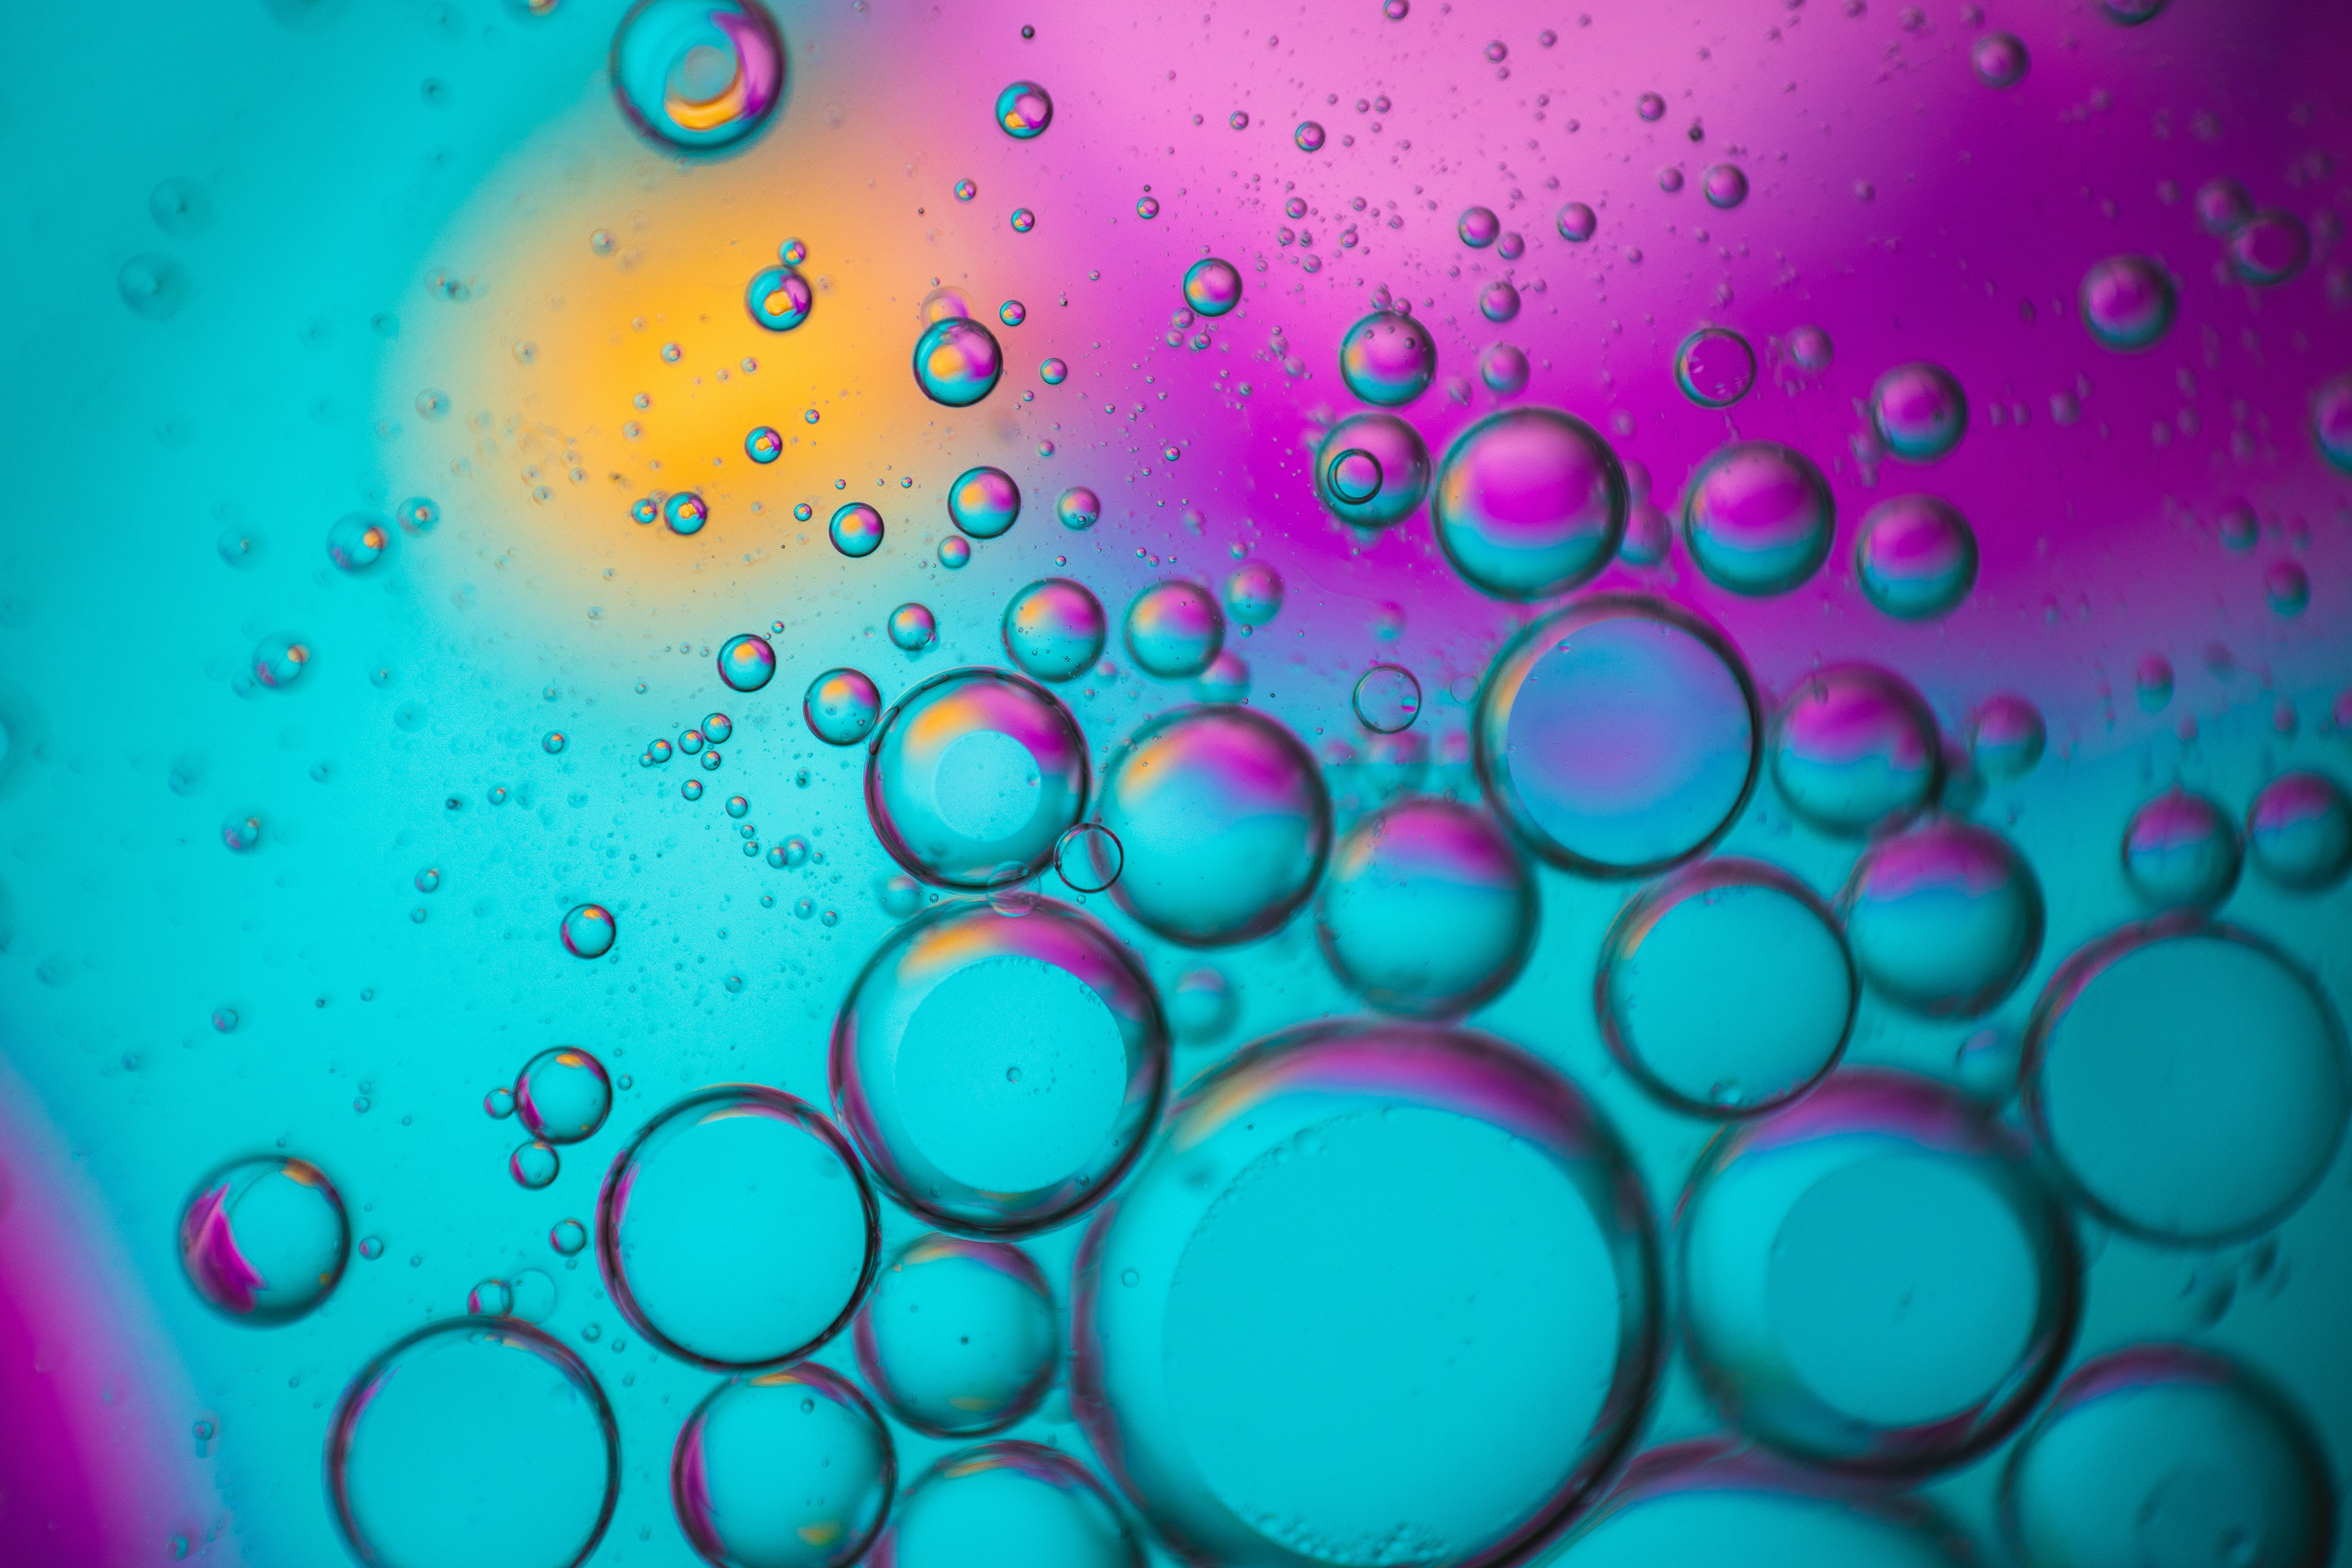 Bubbles Wallpaper 4K, Spectrum, Colorful, Teal, Turquoise, Pink